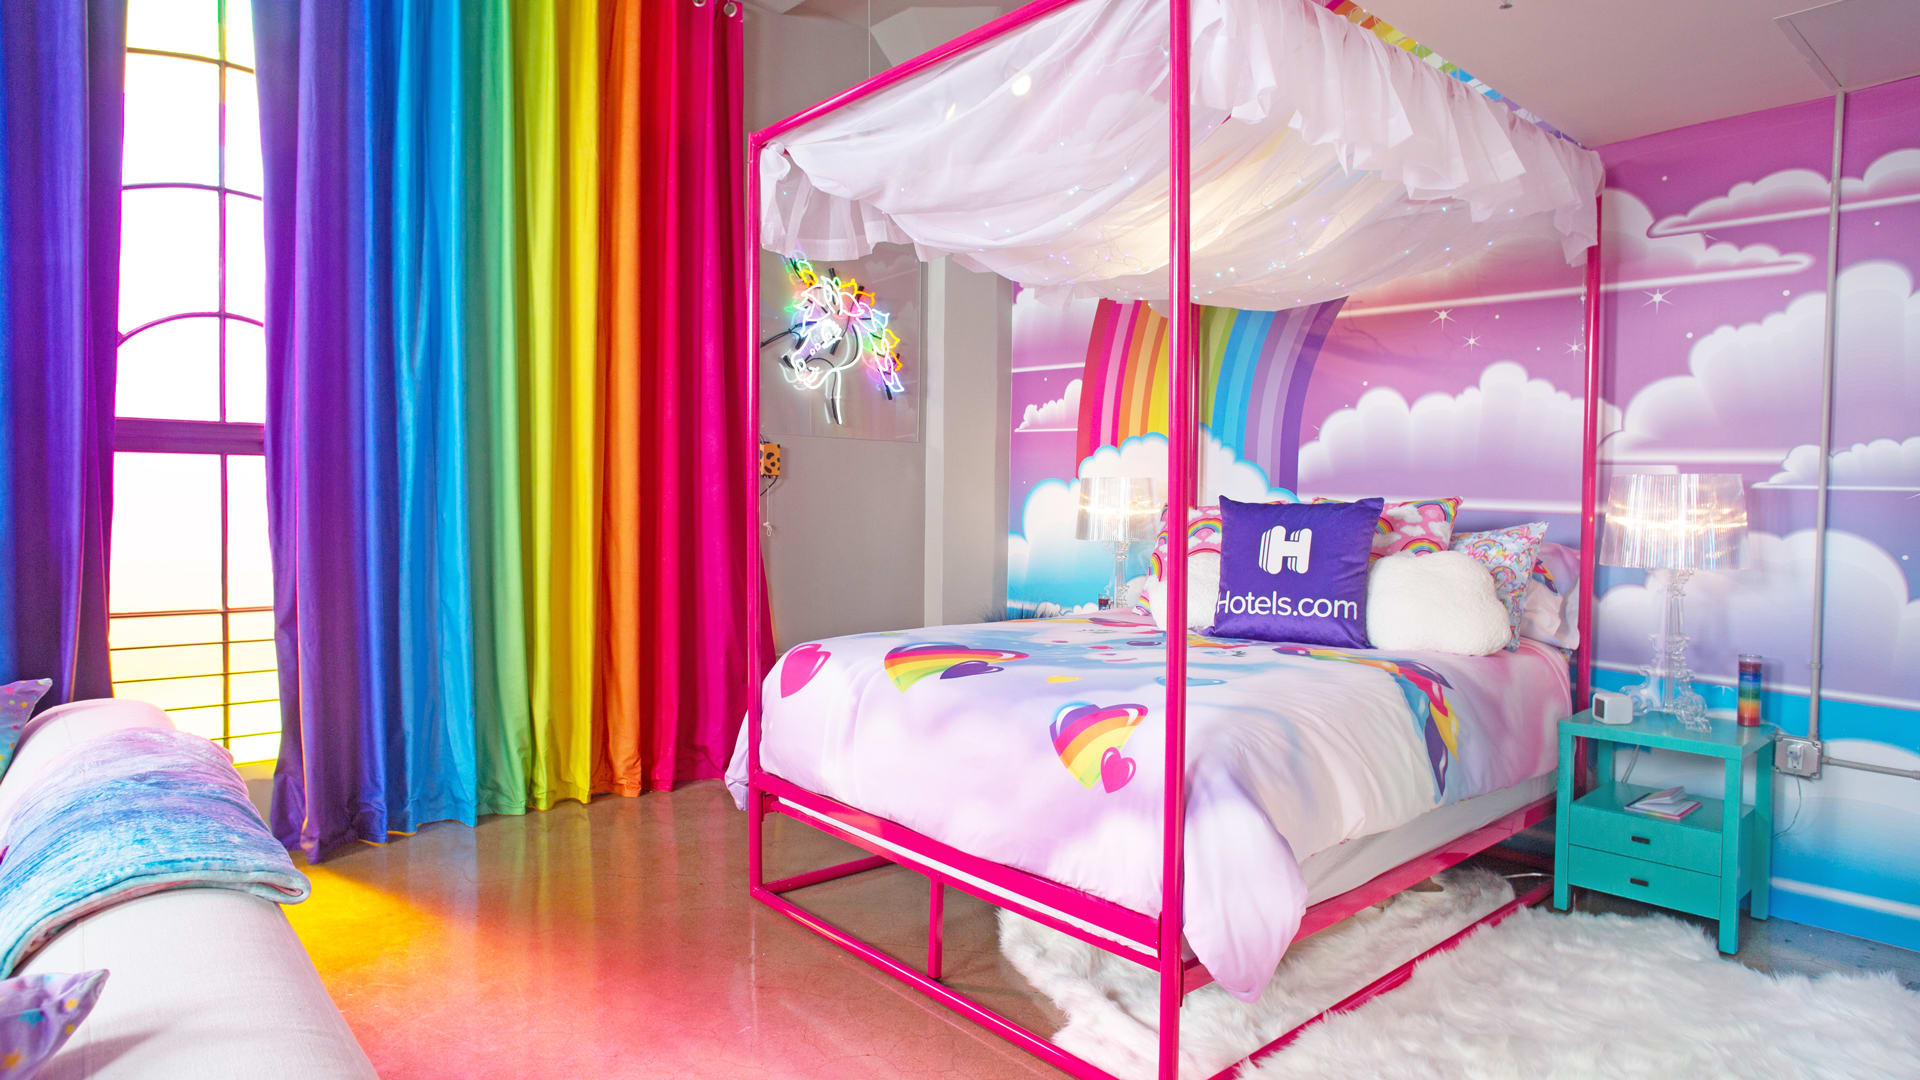 This Lisa Frank hotel room is a time capsule for ’90s cool kids